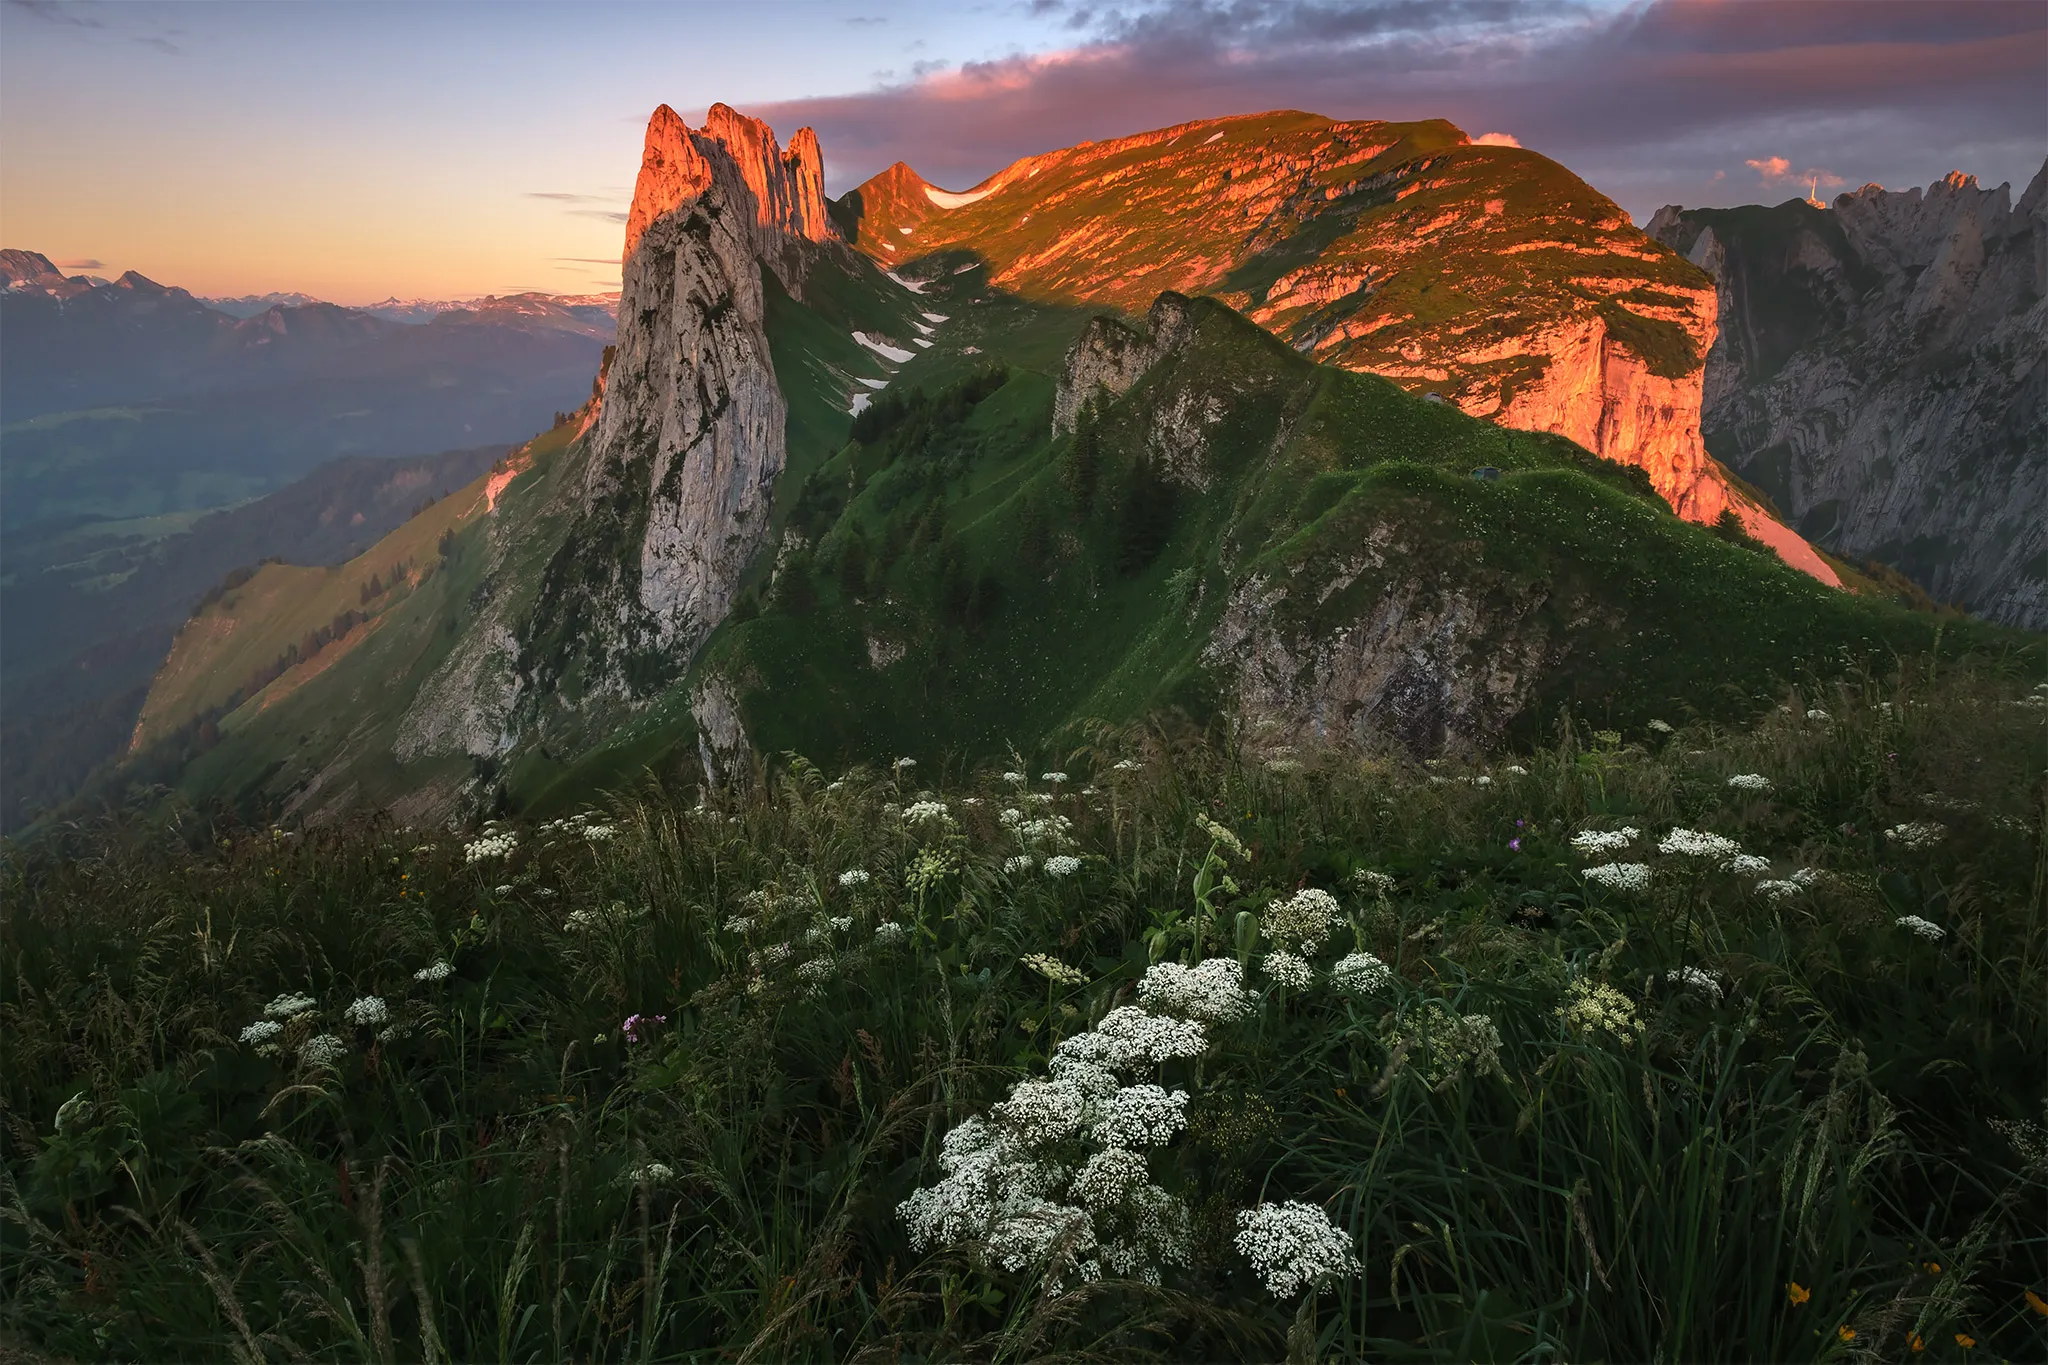 A sunrise view of the impressive mountains in Appenzell, Switzerland